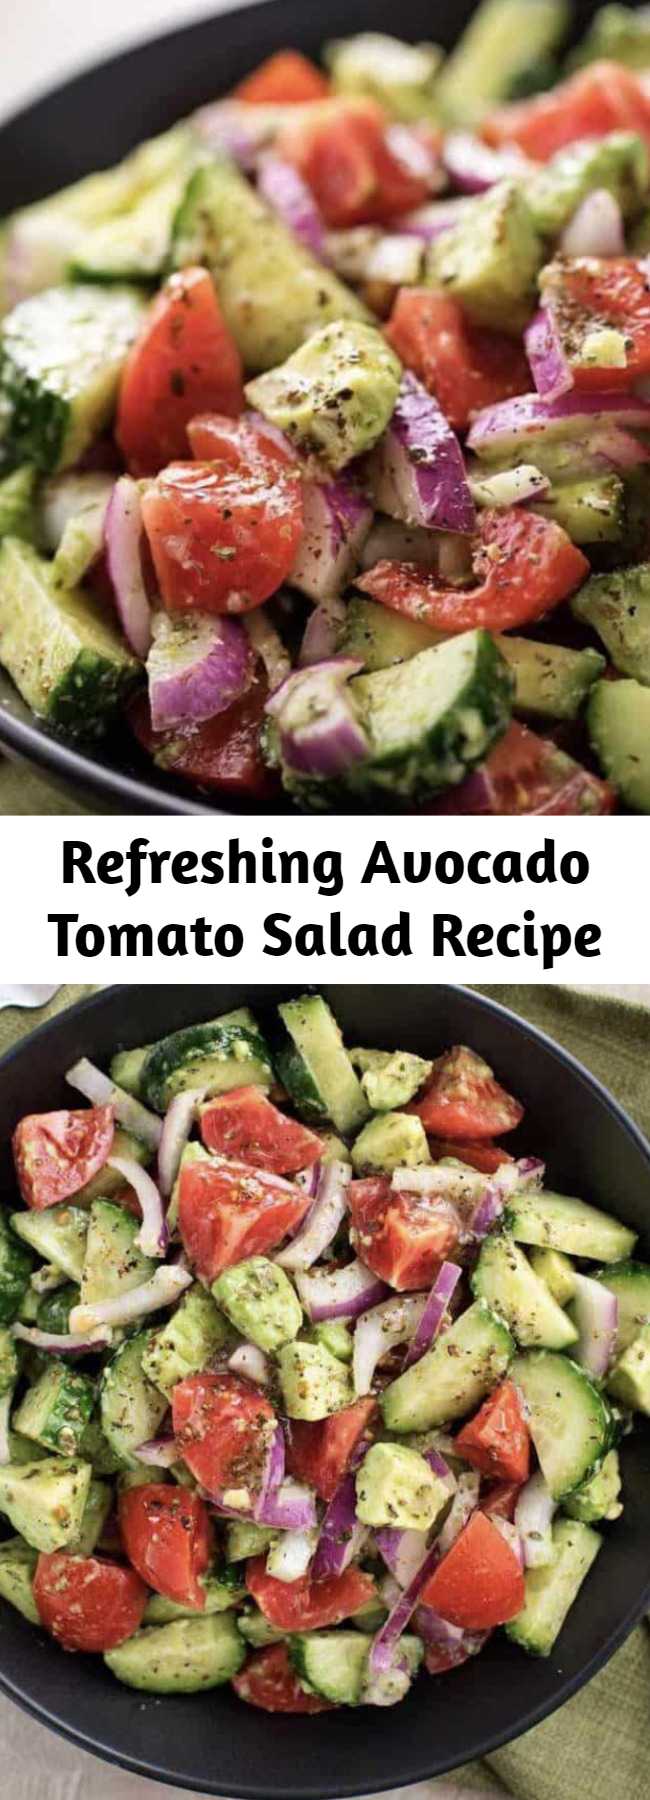 Refreshing Avocado Tomato Salad Recipe - This fresh and delicious Avocado Tomato salad recipe is made with cucumbers, tomatoes, and avocados mixed in with a unique and flavorful dressing. So refreshing, perfect for the summer and pairs well with any meal as a side dish or enjoy on its own!